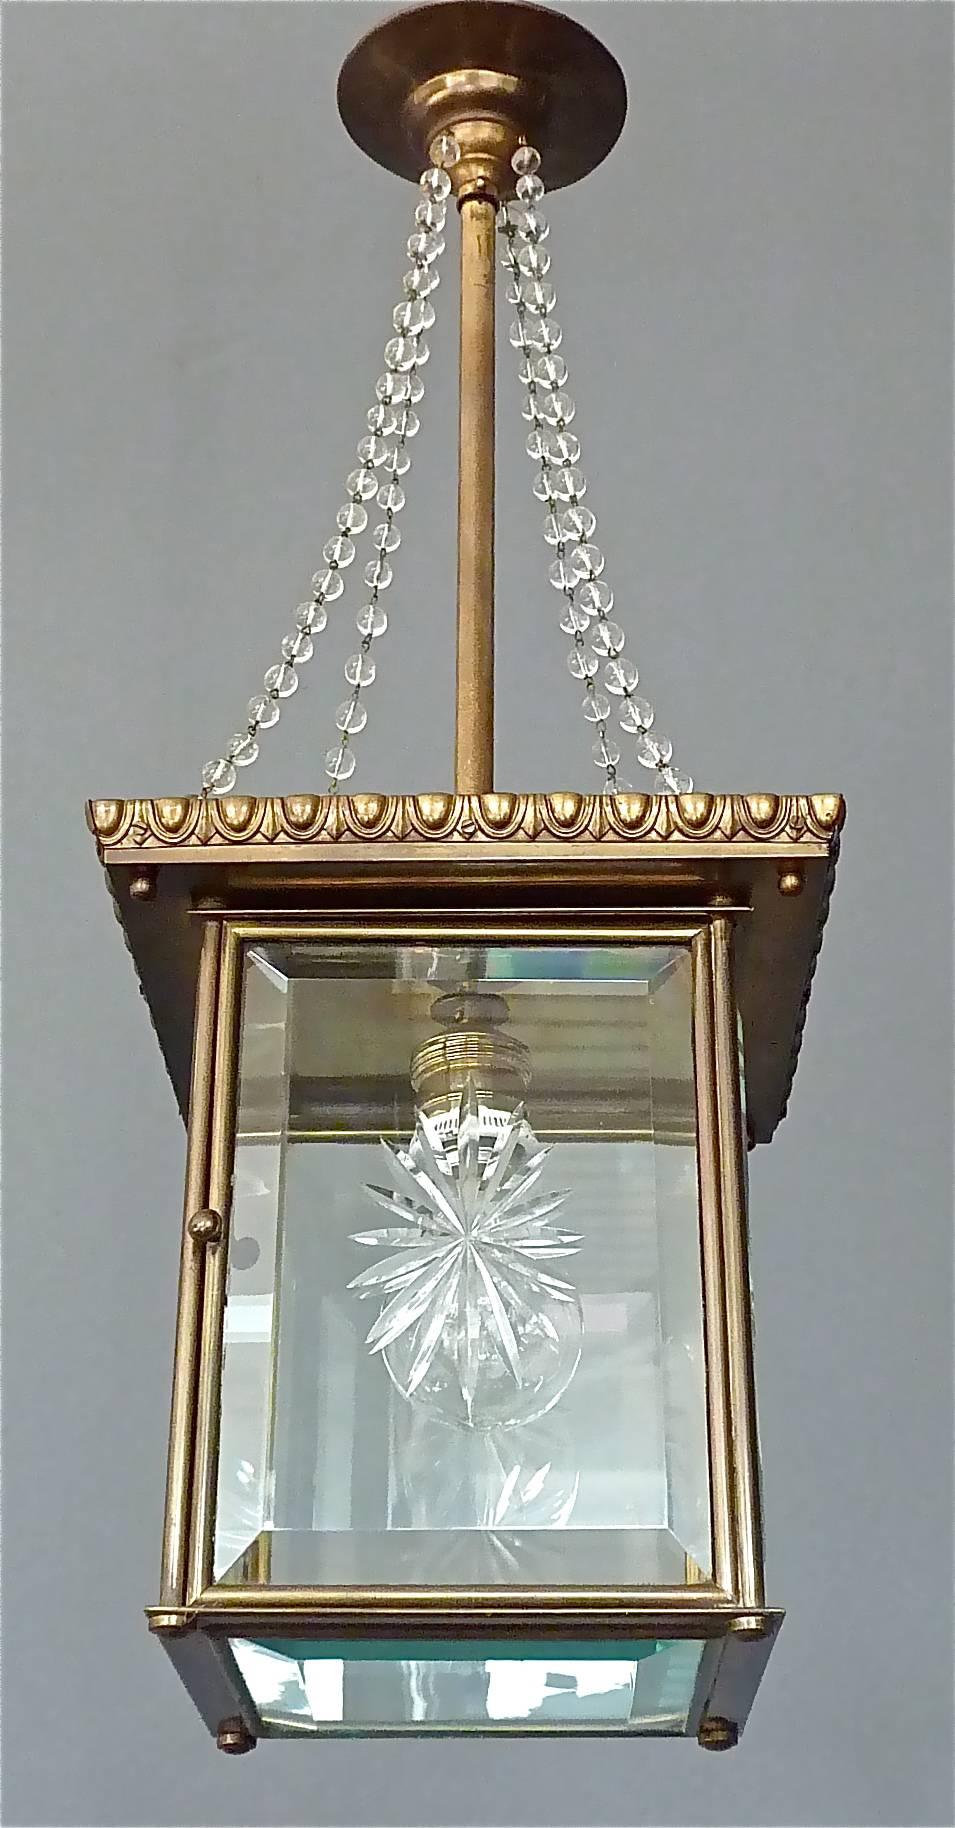 Signed Vienna Secession pendant lamp or lantern, Austria, circa 1905. Antique patinated brass metal lamp corpus with nice Art Nouveau / Jugendstil details, glass pearl strings which come from the canopy, hinged door with impressed XX, unidentified